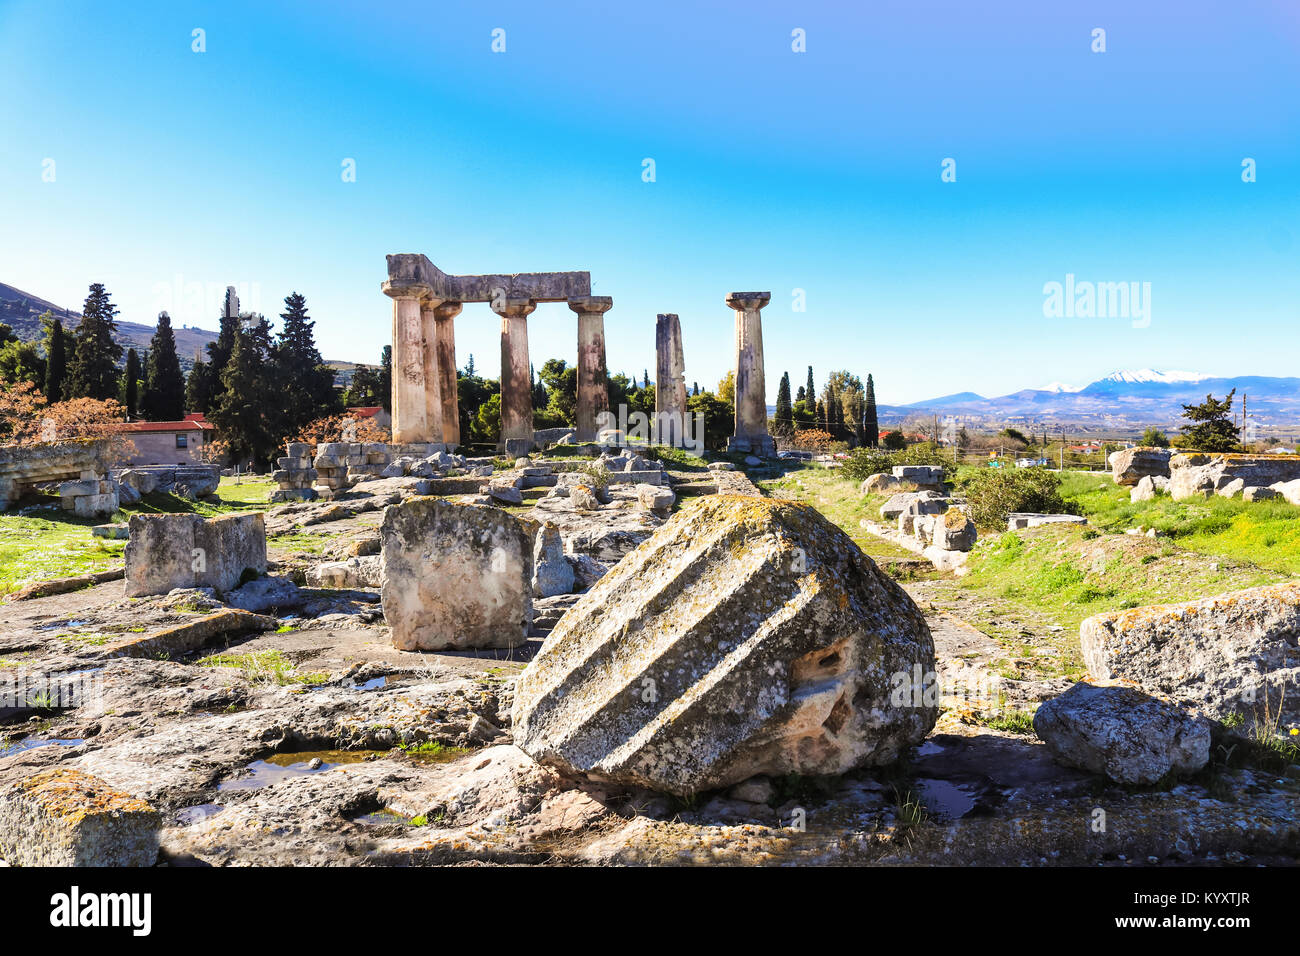 Broken columns in front of the remaining columns of the Temple of Apollo in ancient Corinth on the Peloponnese peninsula in Greece - snow covered moun Stock Photo